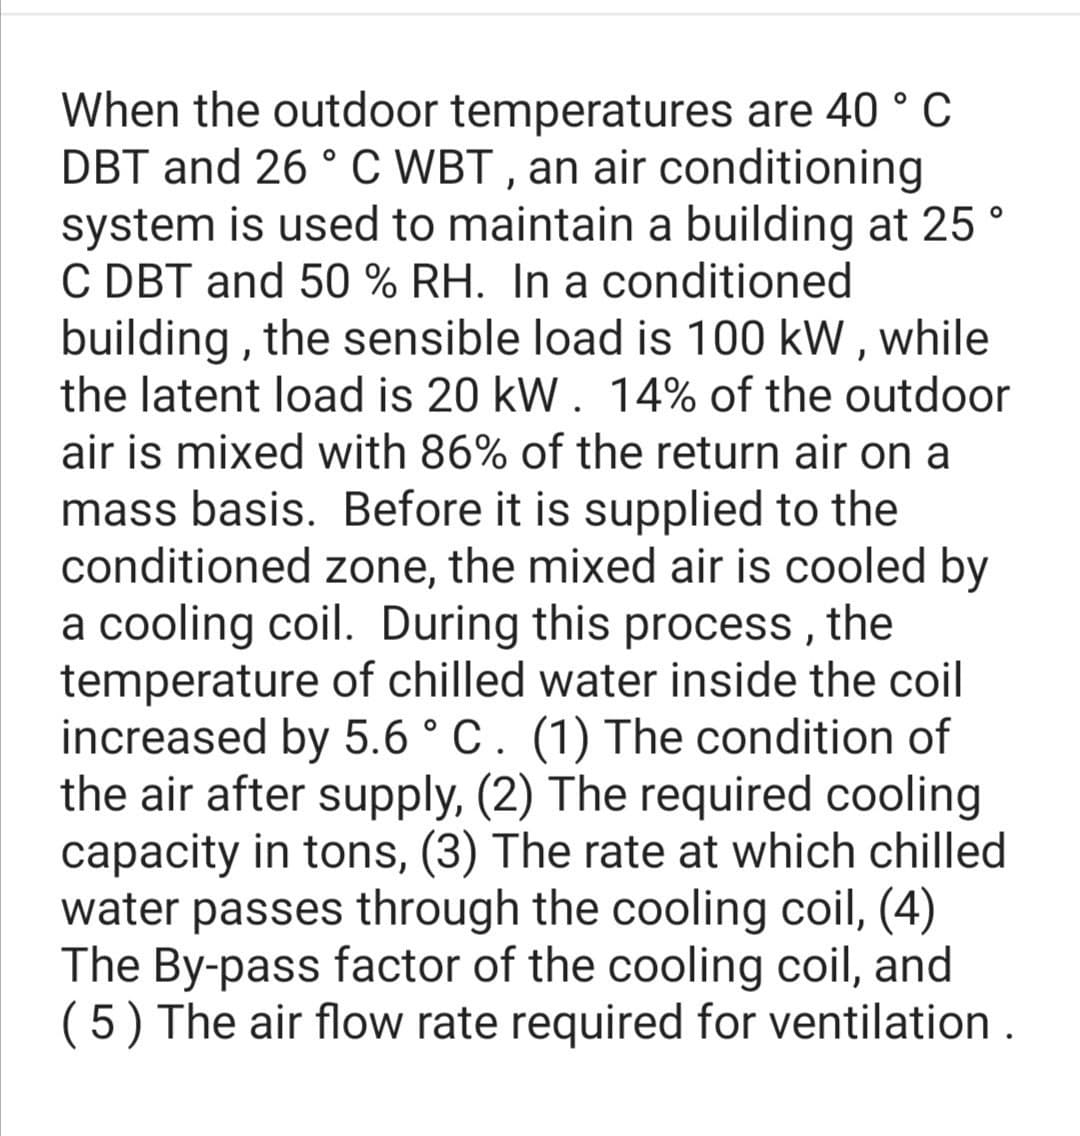 When the outdoor temperatures are 40 ° C
DBT and 26 ° C WBT , an air conditioning
system is used to maintain a building at 25 °
C DBT and 50 % RH. In a conditioned
building , the sensible load is 100 kW , while
the latent load is 20 kW. 14% of the outdoor
air is mixed with 86% of the return air on a
mass basis. Before it is supplied to the
conditioned zone, the mixed air is cooled by
a cooling coil. During this process, the
temperature of chilled water inside the coil
increased by 5.6 ° C. (1) The condition of
the air after supply, (2) The required cooling
capacity in tons, (3) The rate at which chilled
water passes through the cooling coil, (4)
The By-pass factor of the cooling coil, and
(5) The air flow rate required for ventilation .
